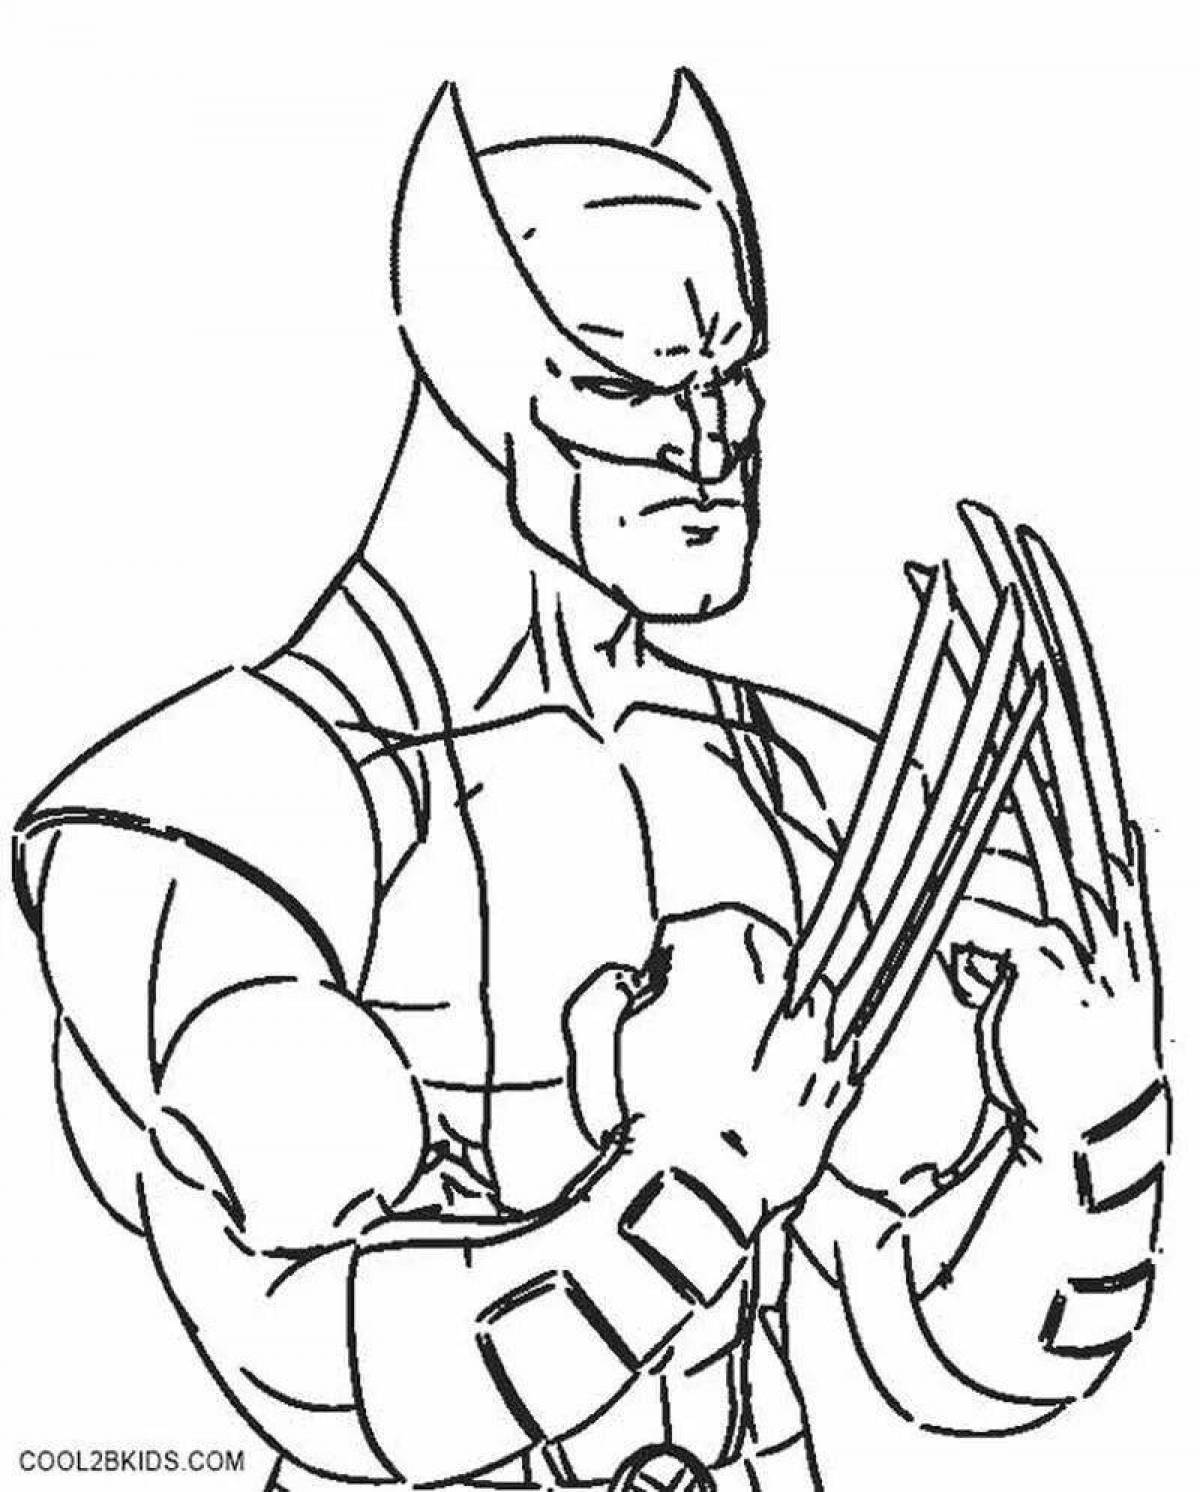 Attractive wolverine coloring book for kids